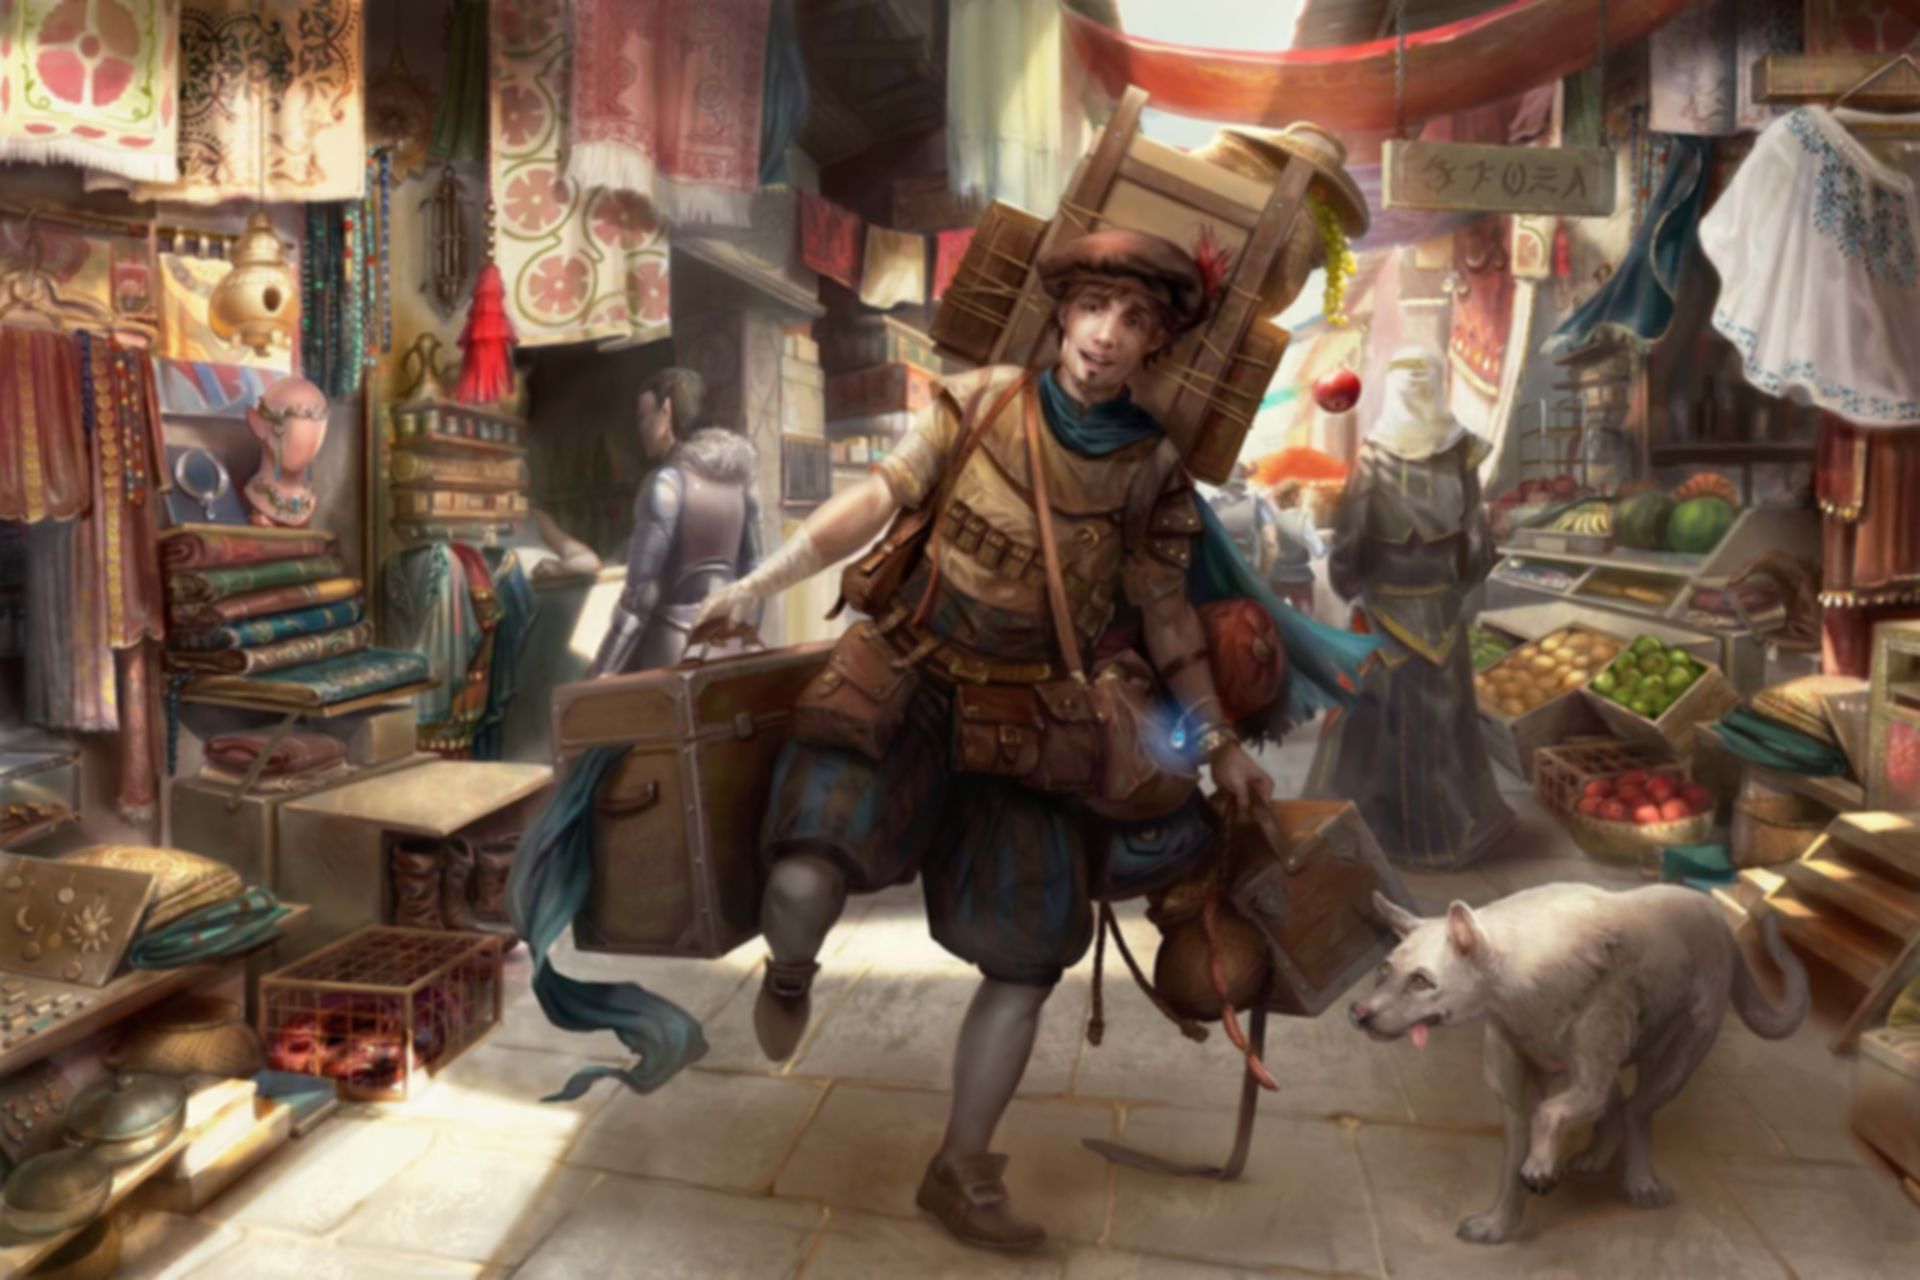 Pathfinder Lost Omens: The Grand Bazaar  Roll20 Marketplace: Digital goods  for online tabletop gaming